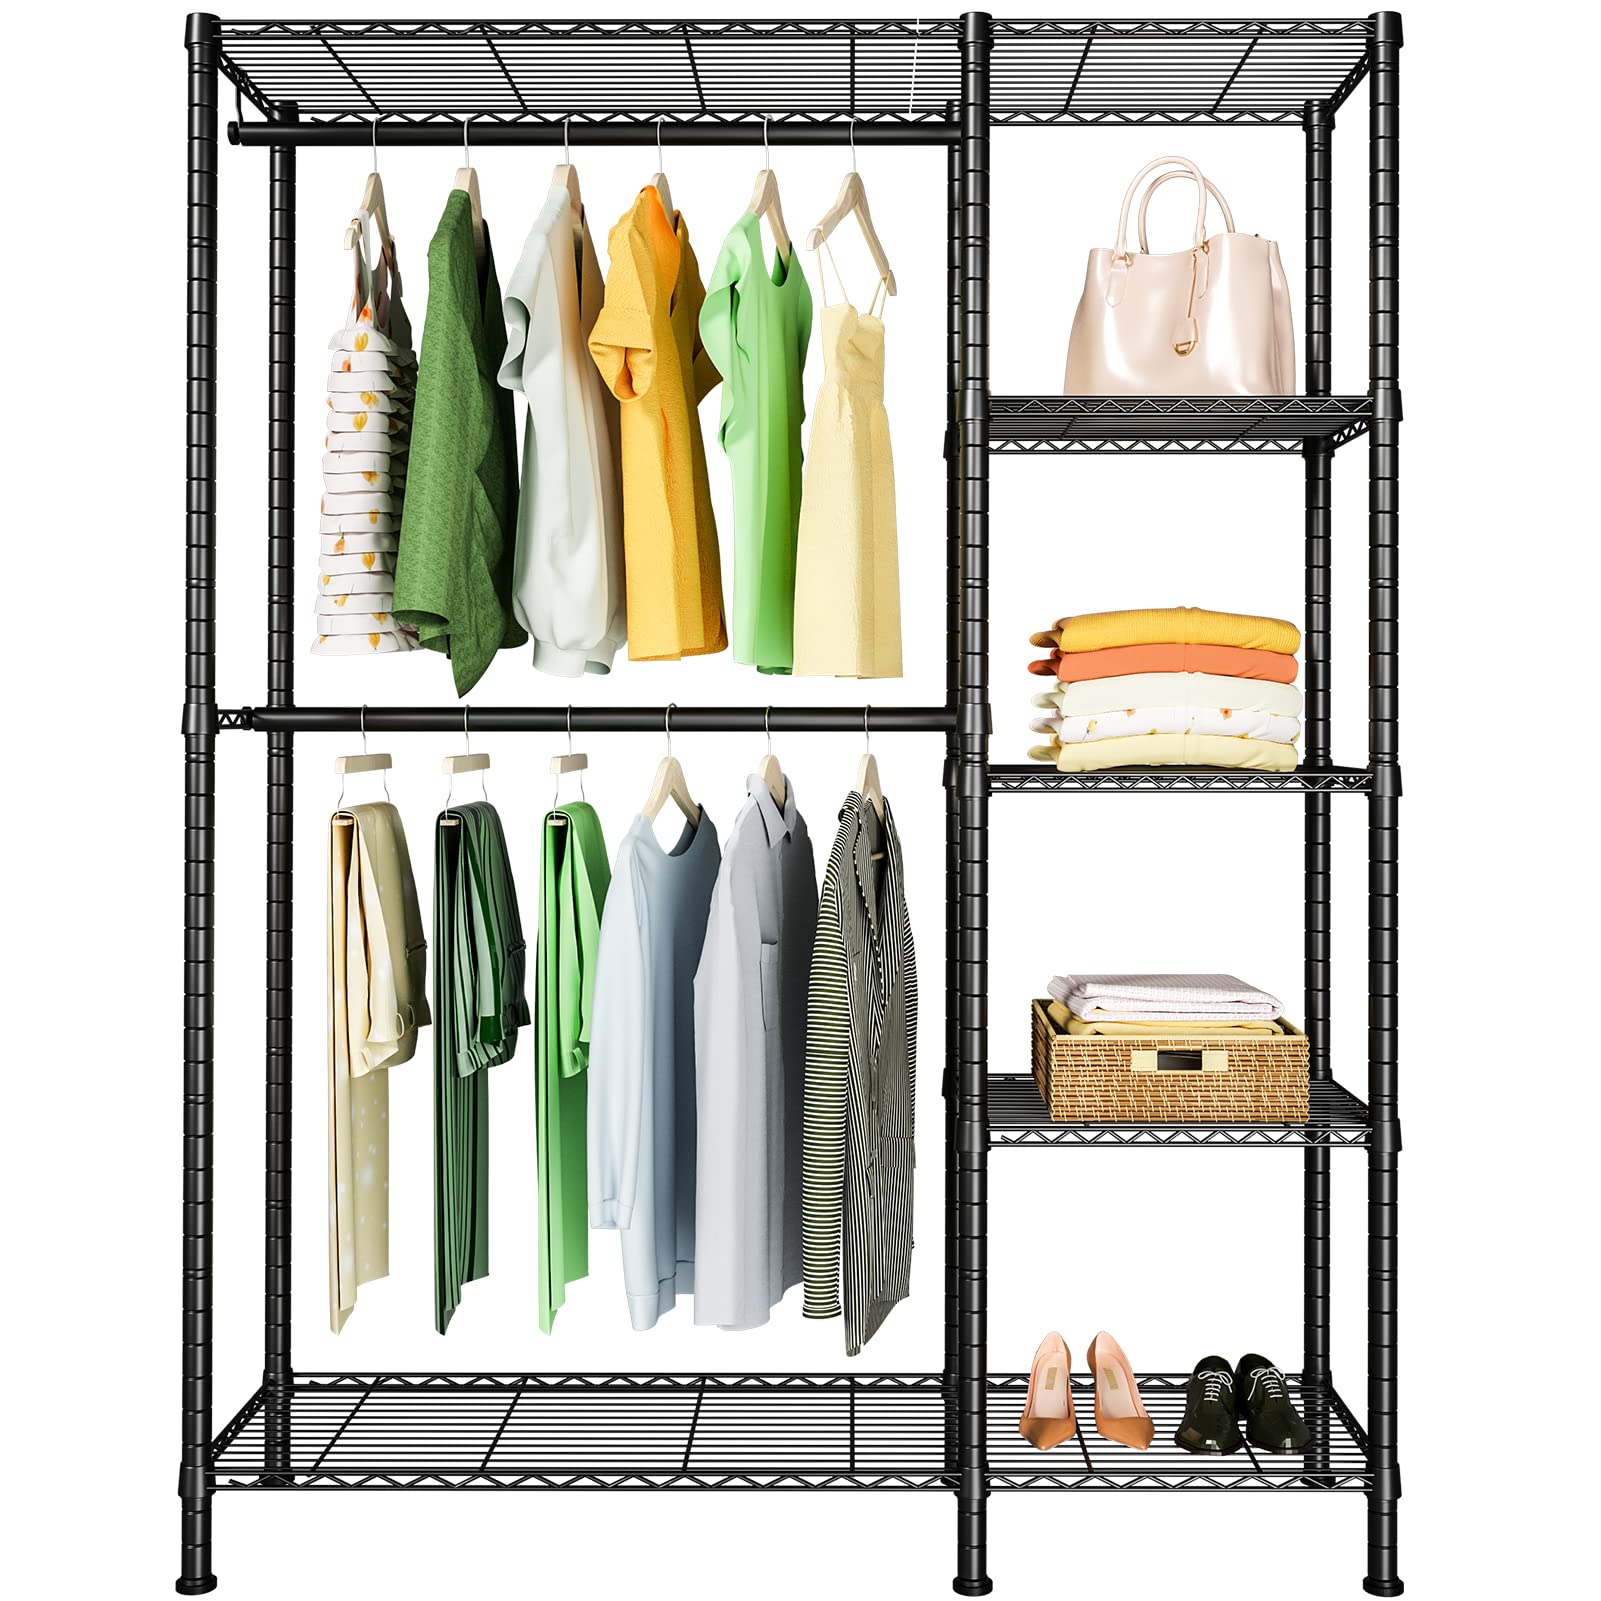 These  Organizers Will Maximize Your Wardrobe Space, and